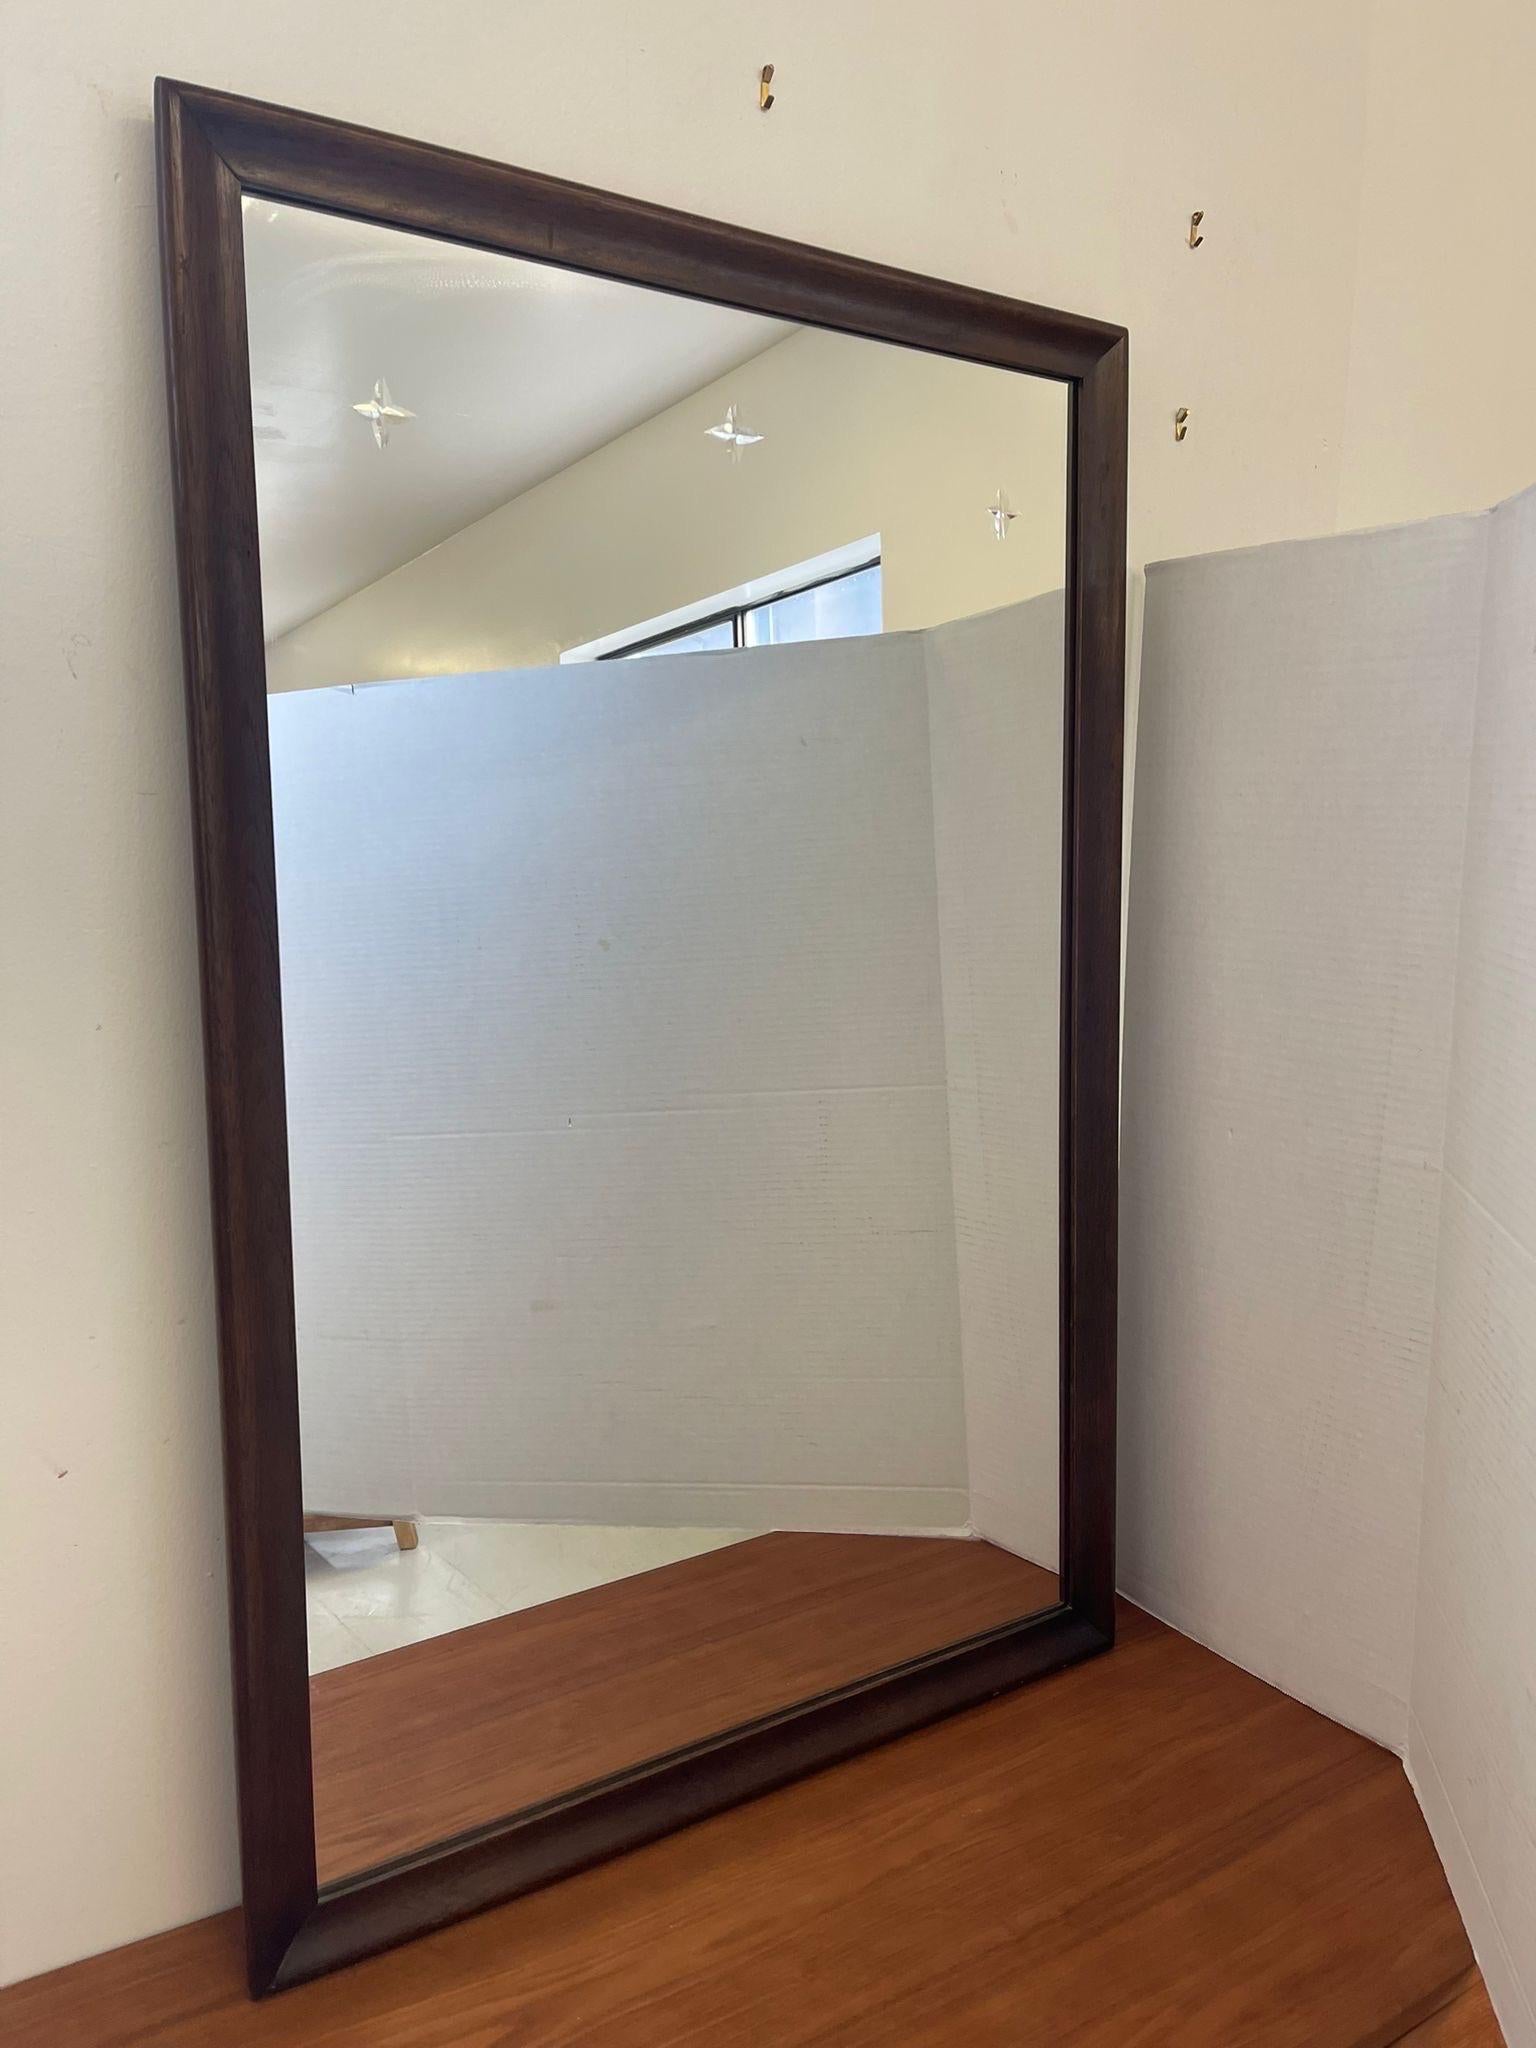 Wood Framed Broyhill Saga Mirror with 3 Star Etching on the Top. Vintage Condition Consistent with Age as Pictured

Dimensions. 29 W ; 3/4 D ; 43 H